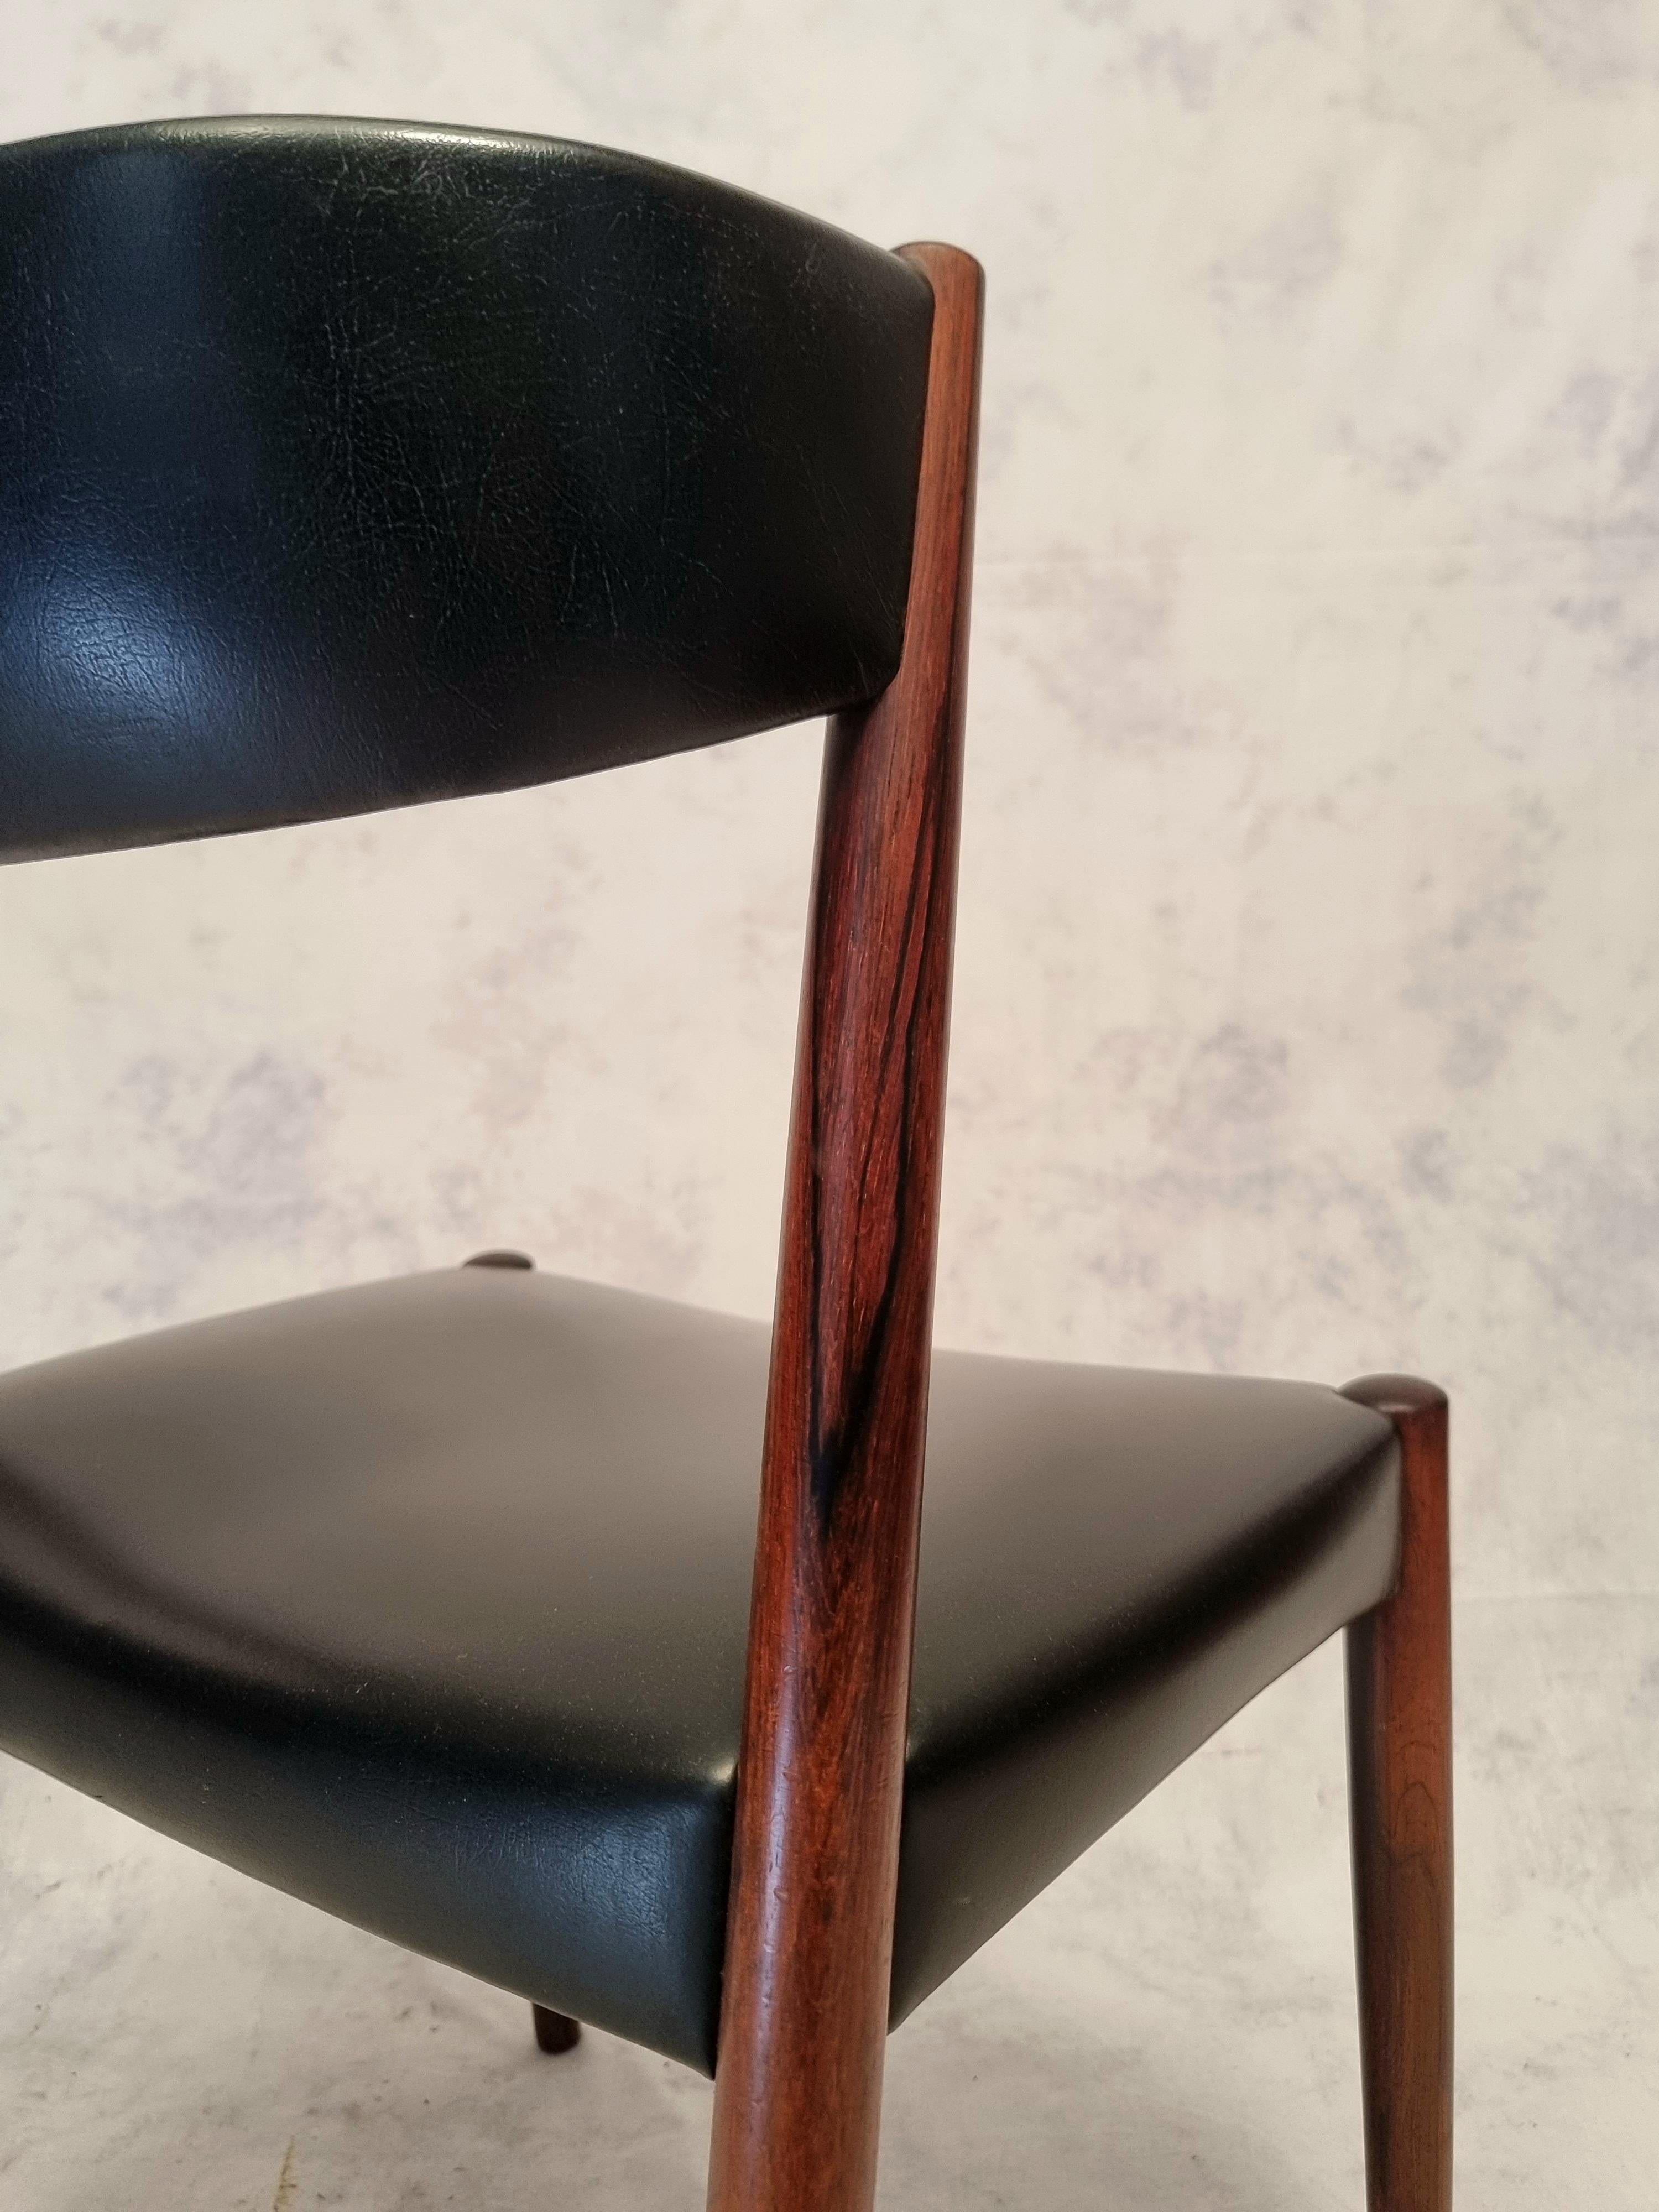 Series Of Four Scandinavian Chairs - Vejle Mobelfabrik - Rosewood - Ca 1960 For Sale 4